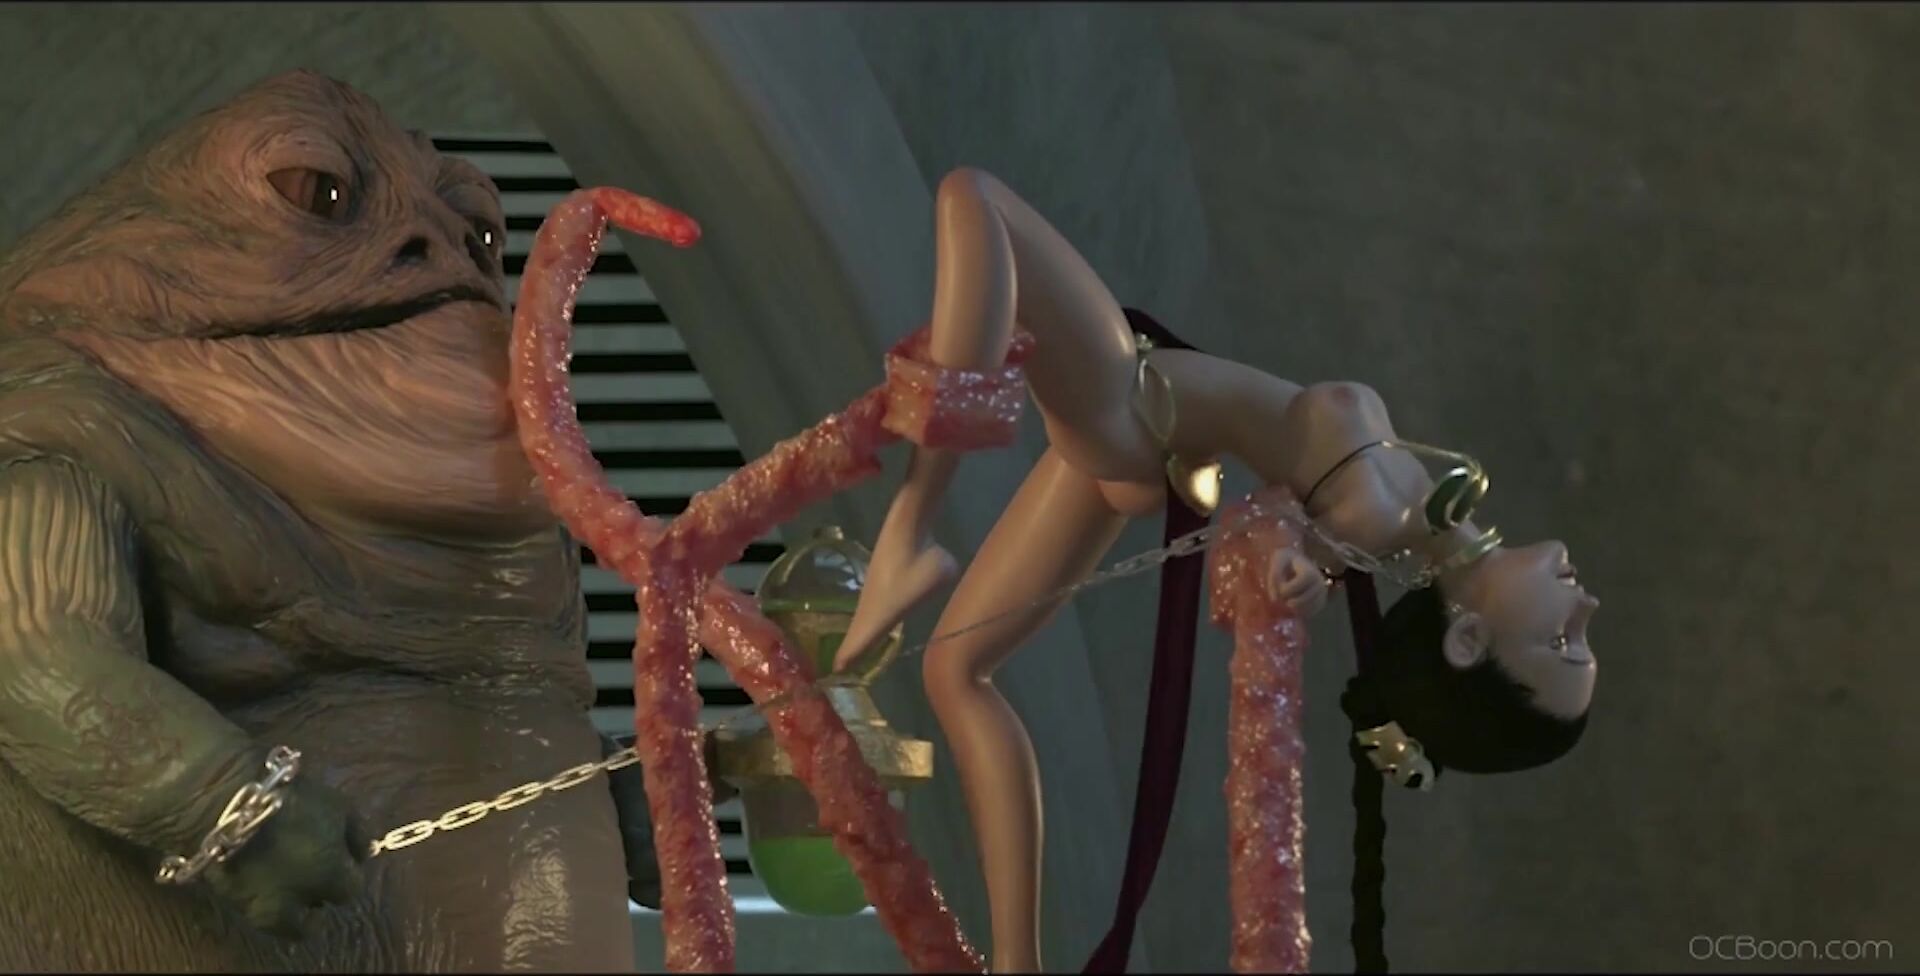 Jabba the Hutt sexually enslaves and violates Princess Leia with his  tentacles in a graphic hentai scene. | AREA51.PORN